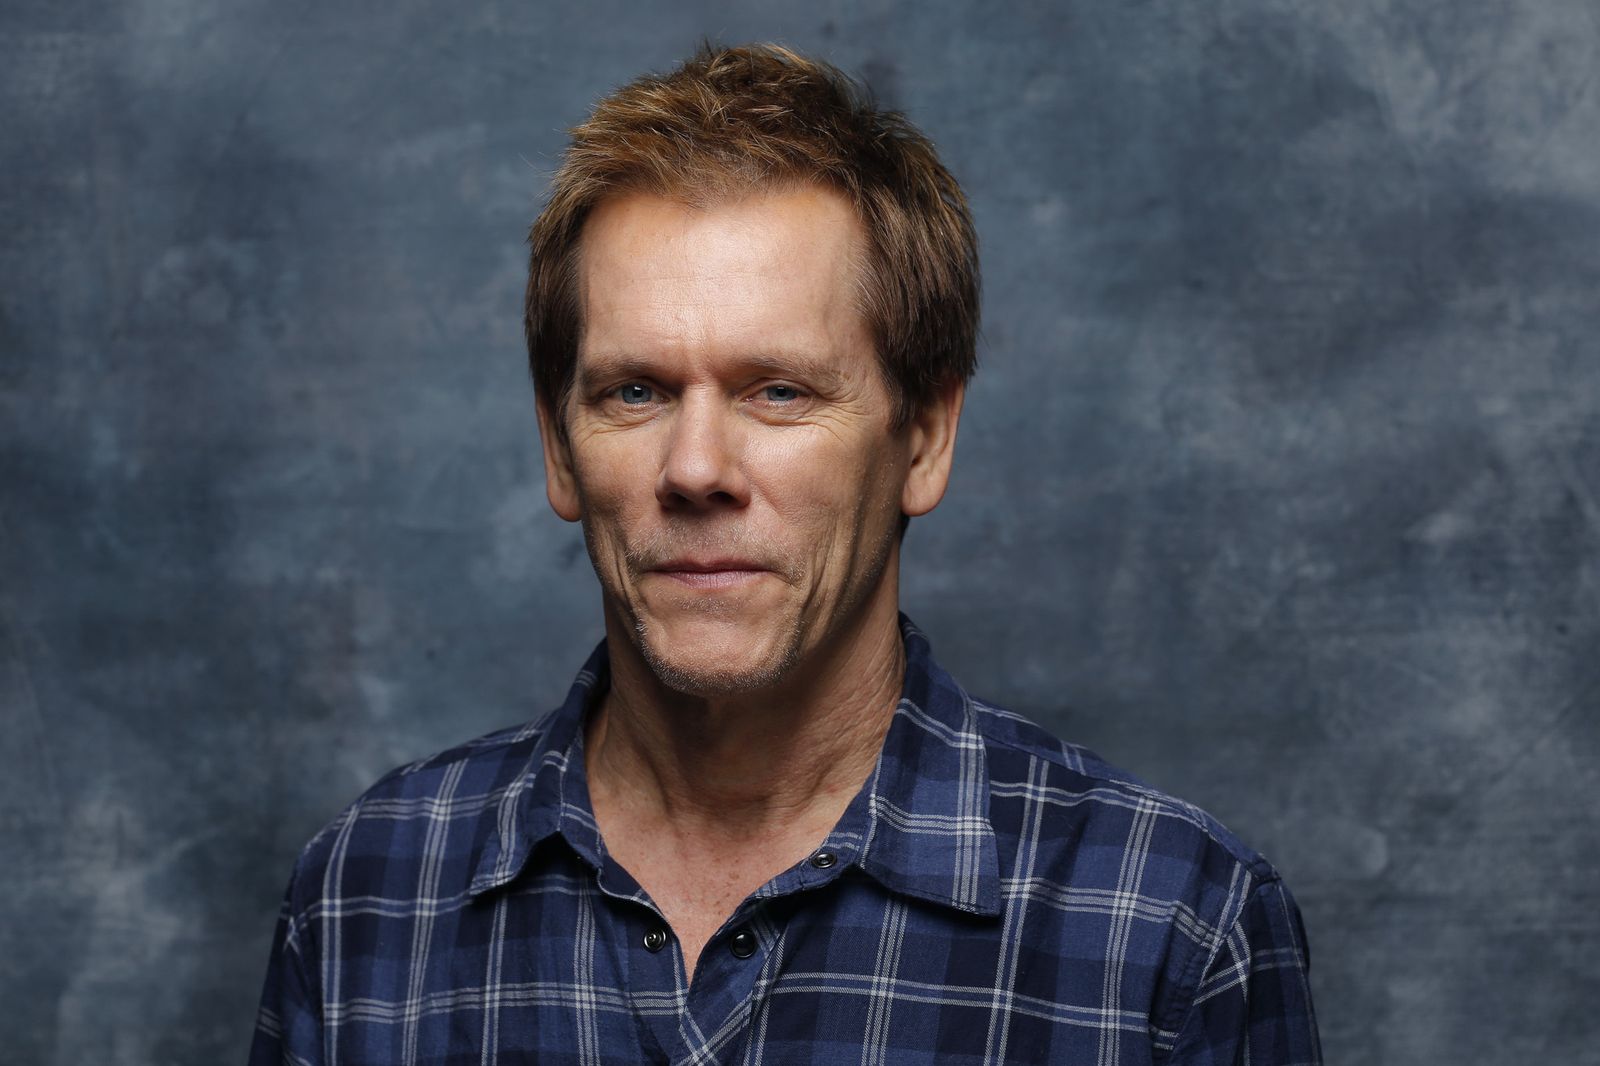 I find writing songs extremely therapeutic: Kevin Bacon Talks About Coping With Anxiety